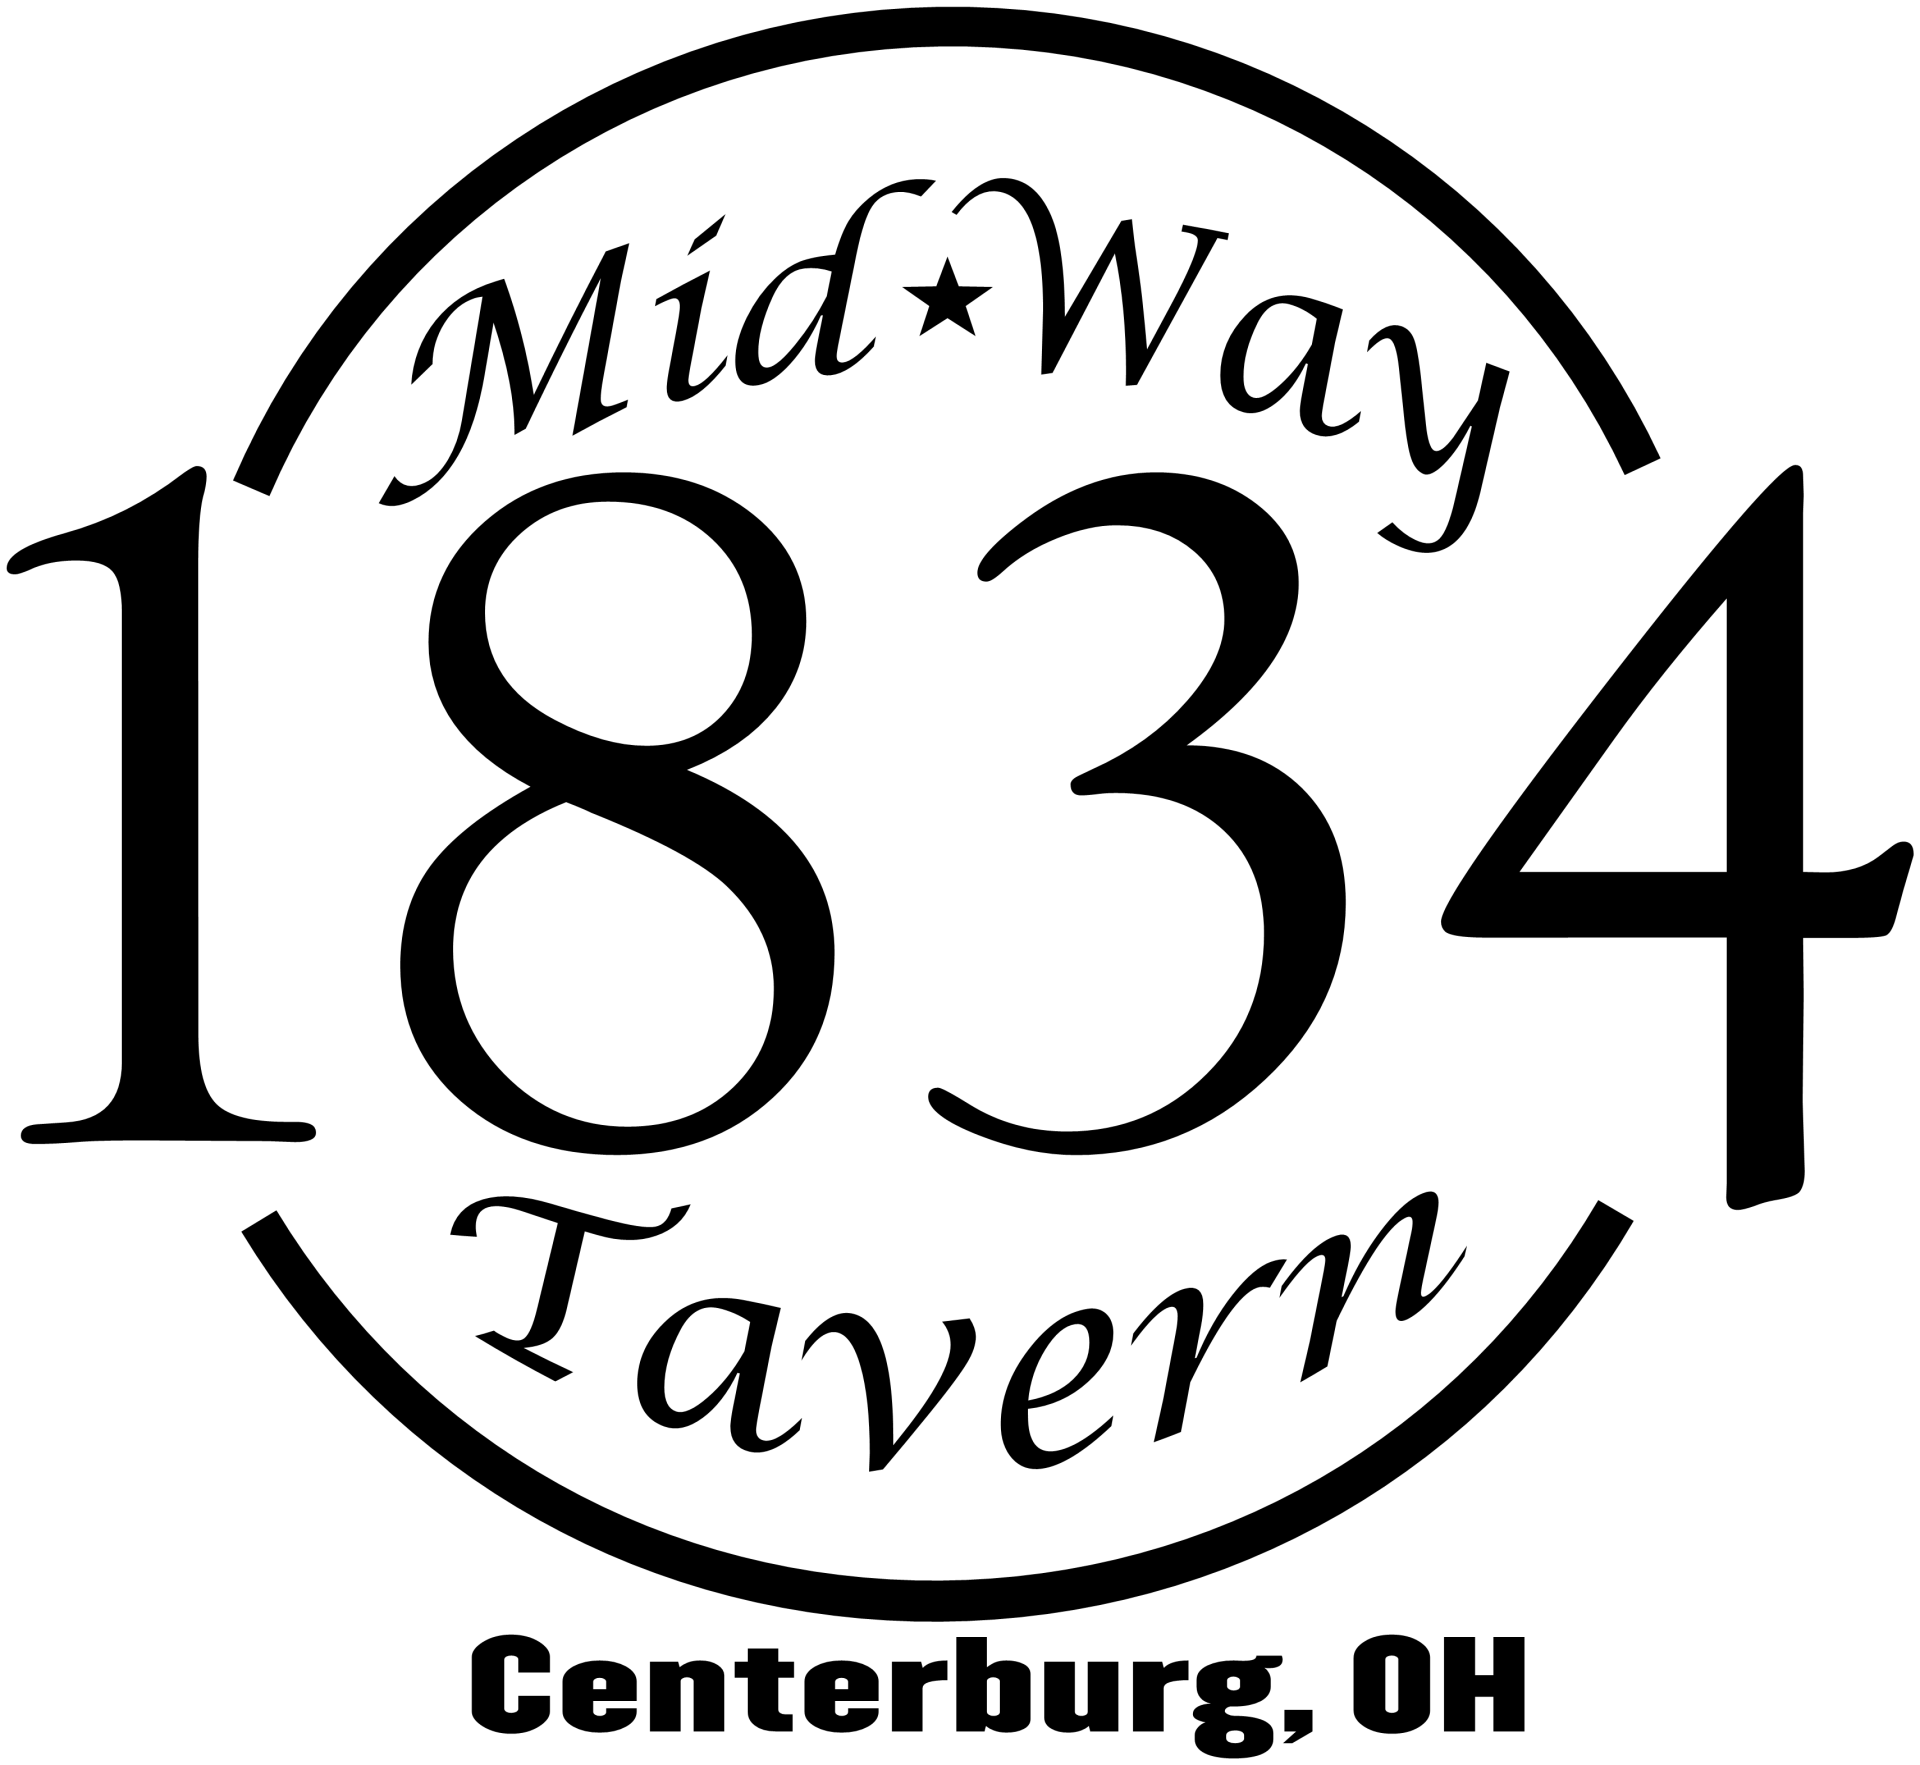 a black and white logo for midway 1834 tavern in centerburg , oh .